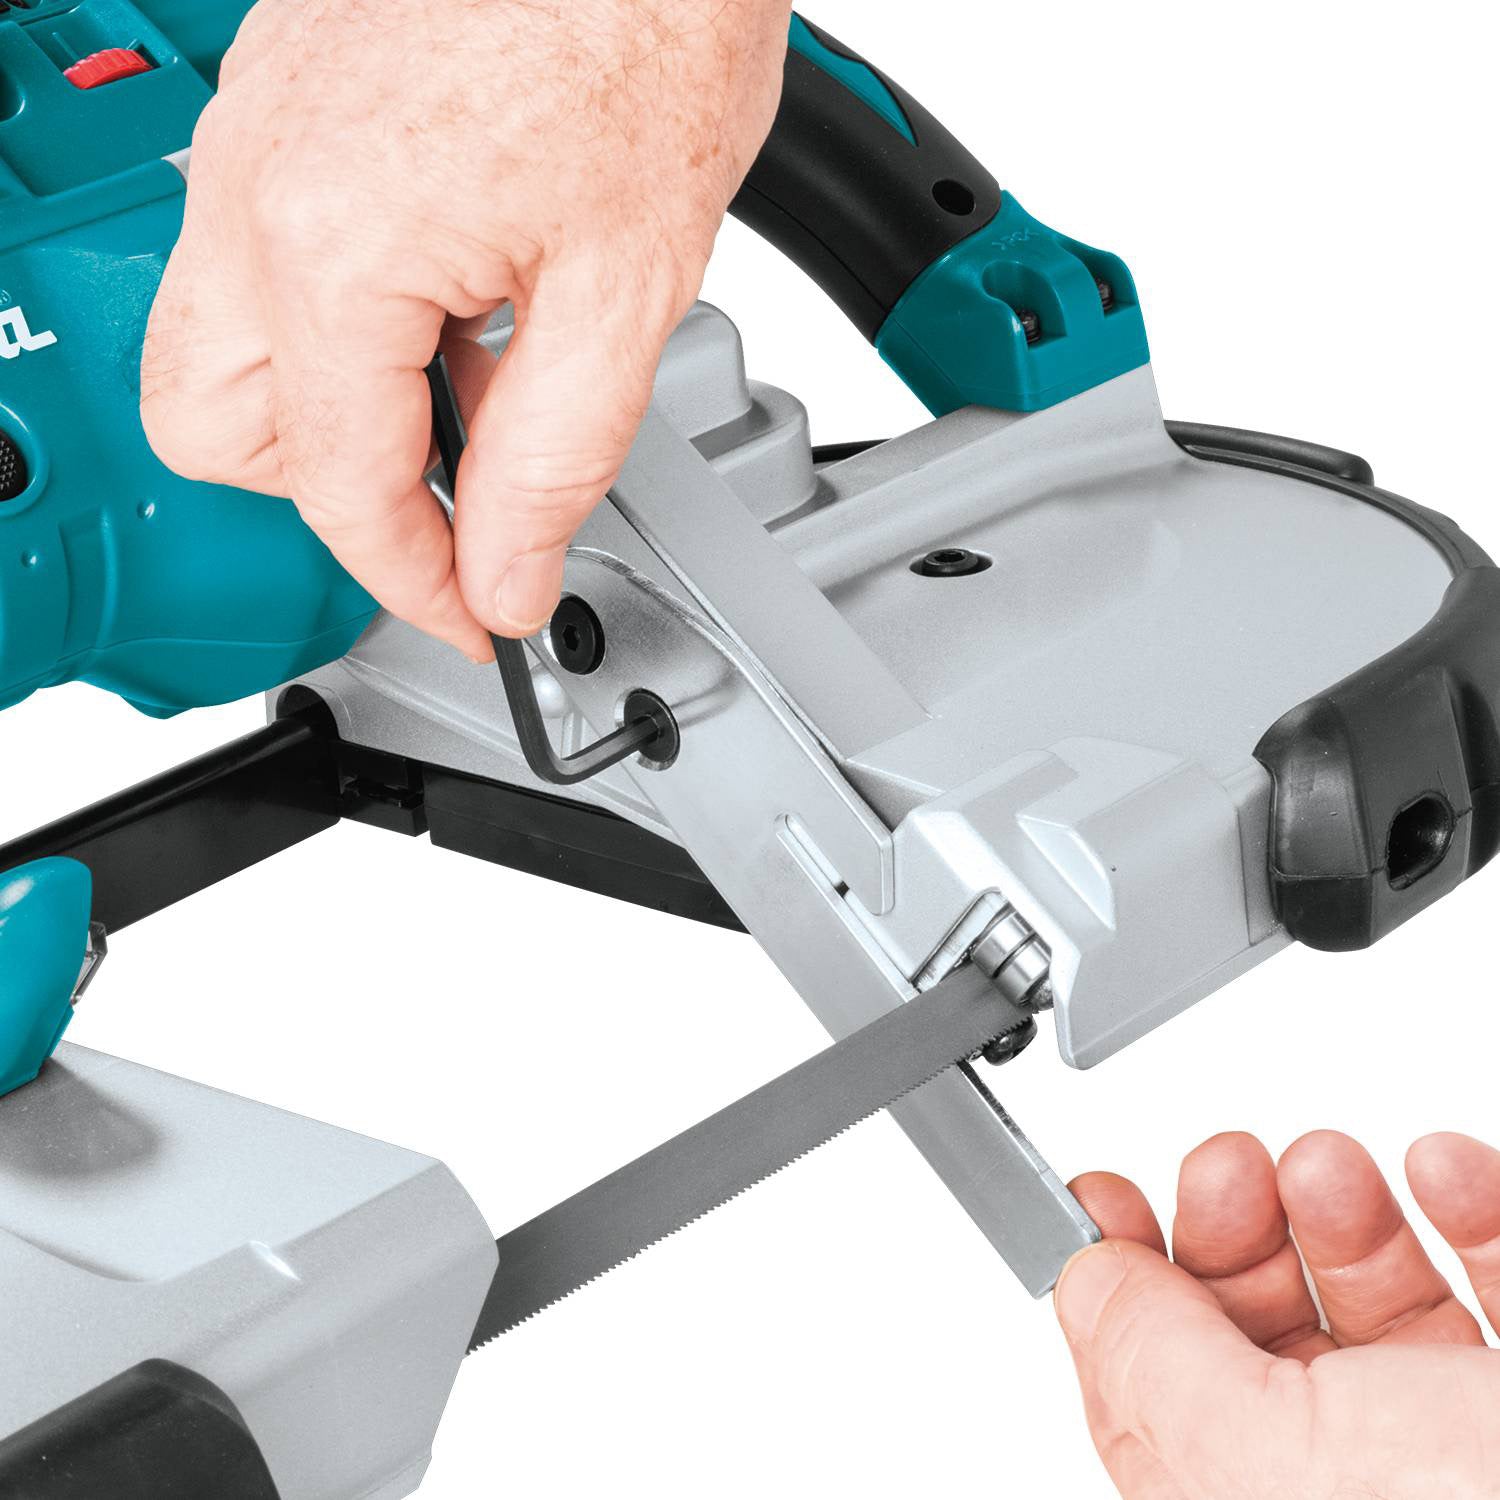 Makita XBP02Z 18V LXT Lithium-Ion Cordless Portable Band Saw, Tool Only - 2